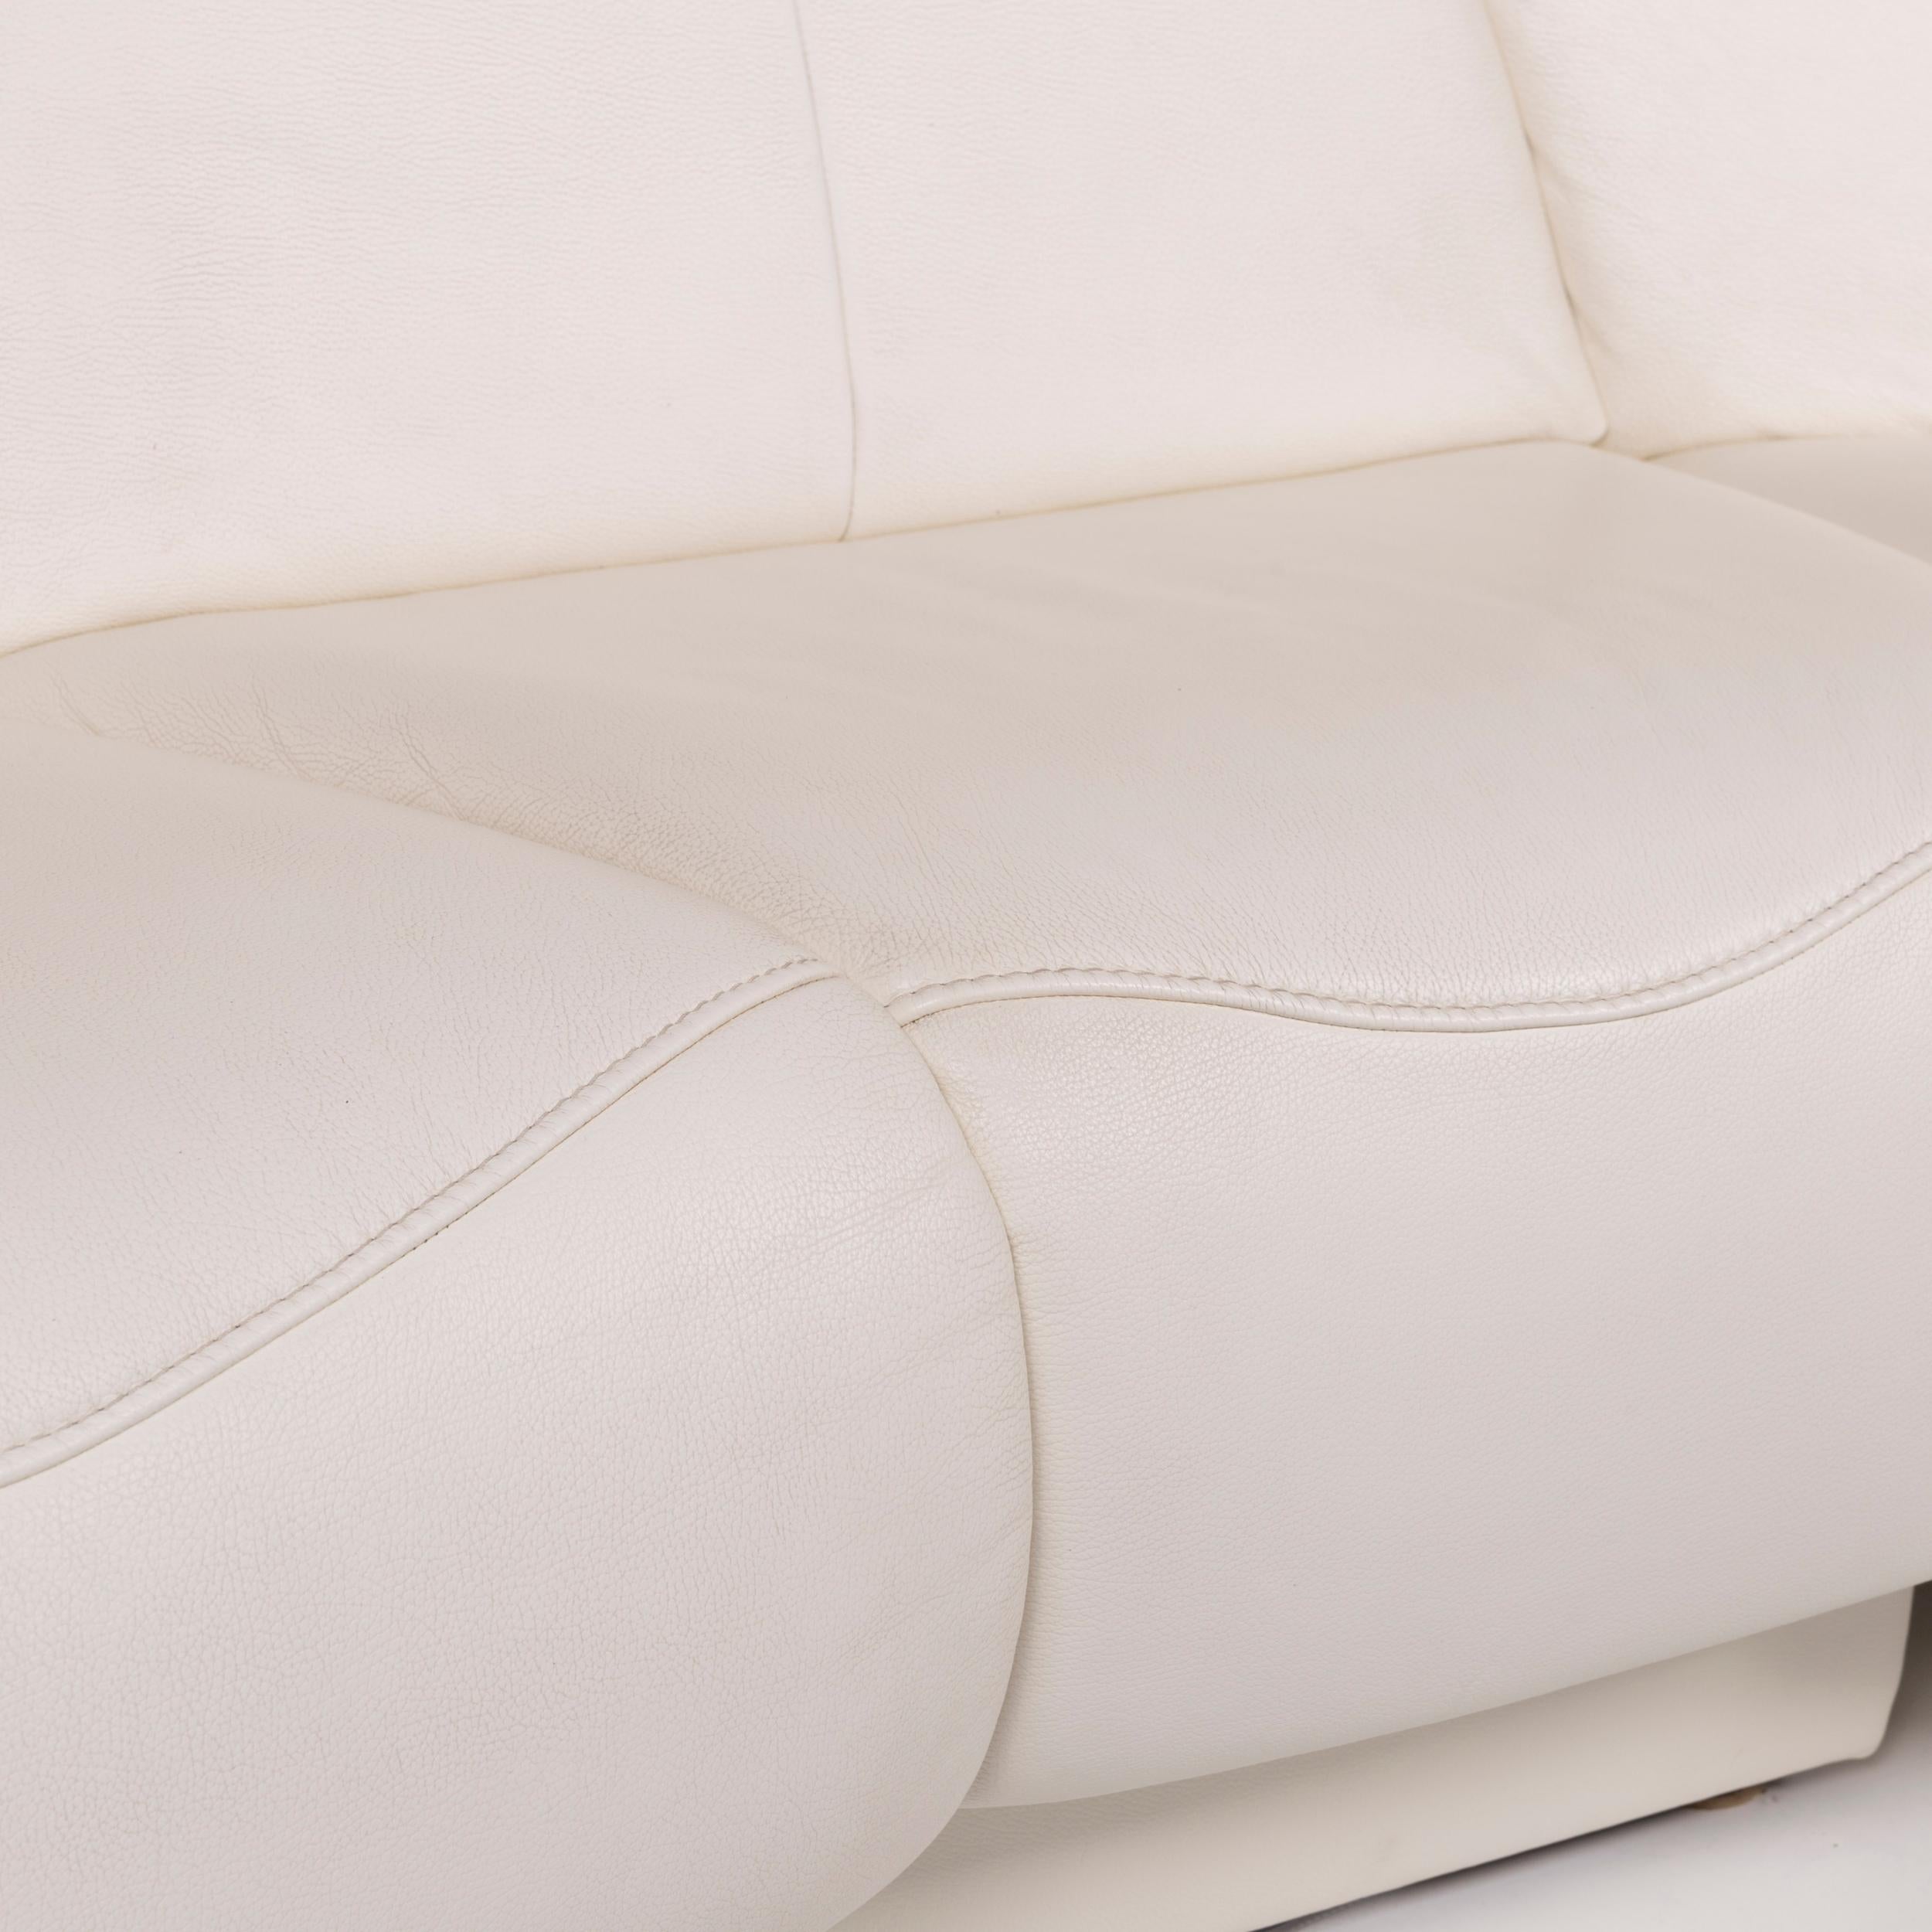 We bring to you a Himolla trapeze leather sofa white three-seat incl. Function.

 

 Product measurements in centimeters:
 

Depth 106
Width 215
Height 107
Seat-height 46
Rest-height 62
Seat-depth 56
Seat-width 162
Back-height 67.